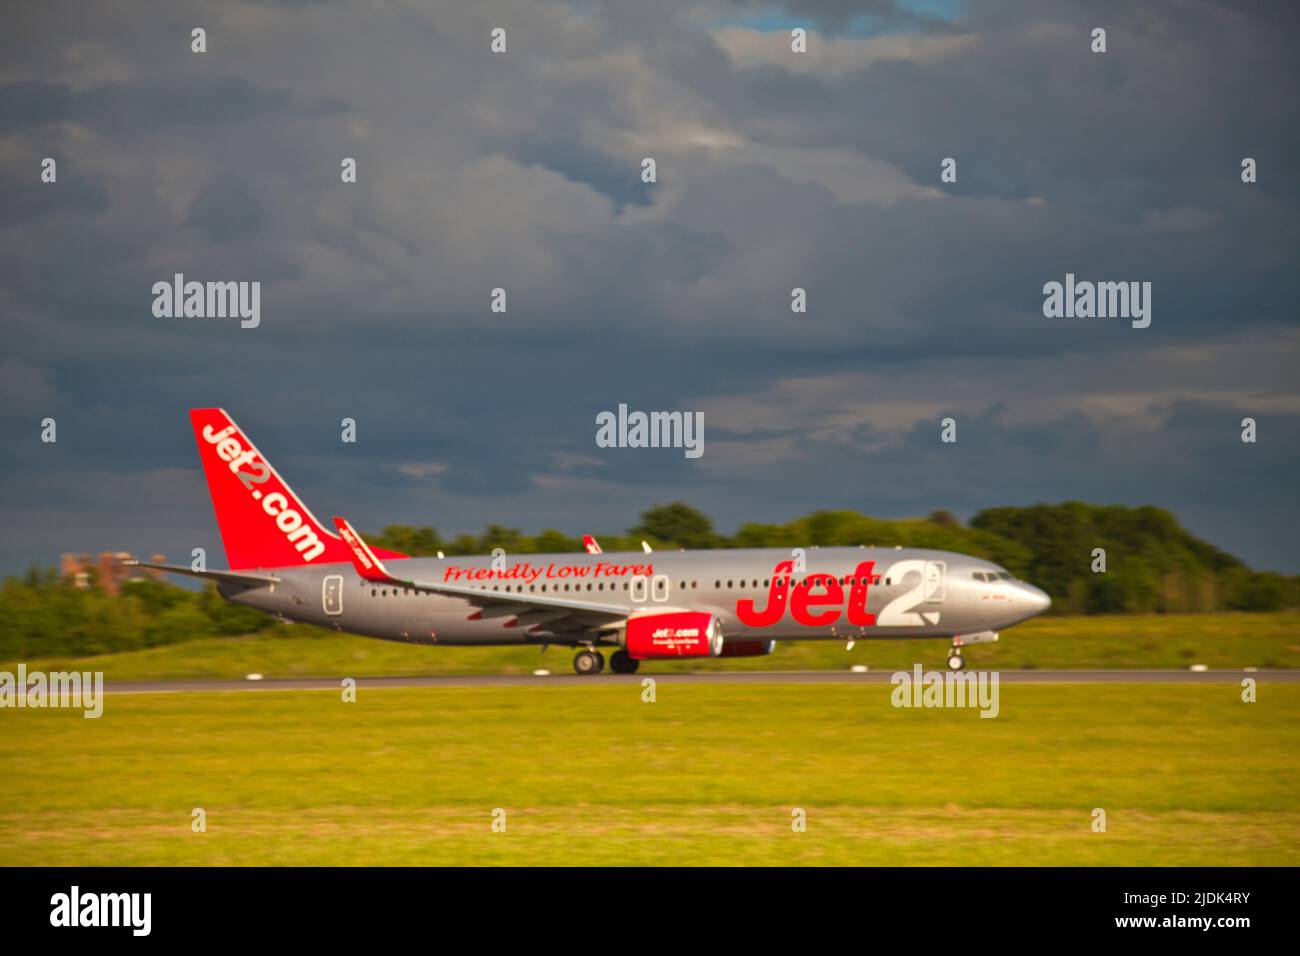 Jet 2 plane taking off from Manchester airport's runway, UK Stock Photo